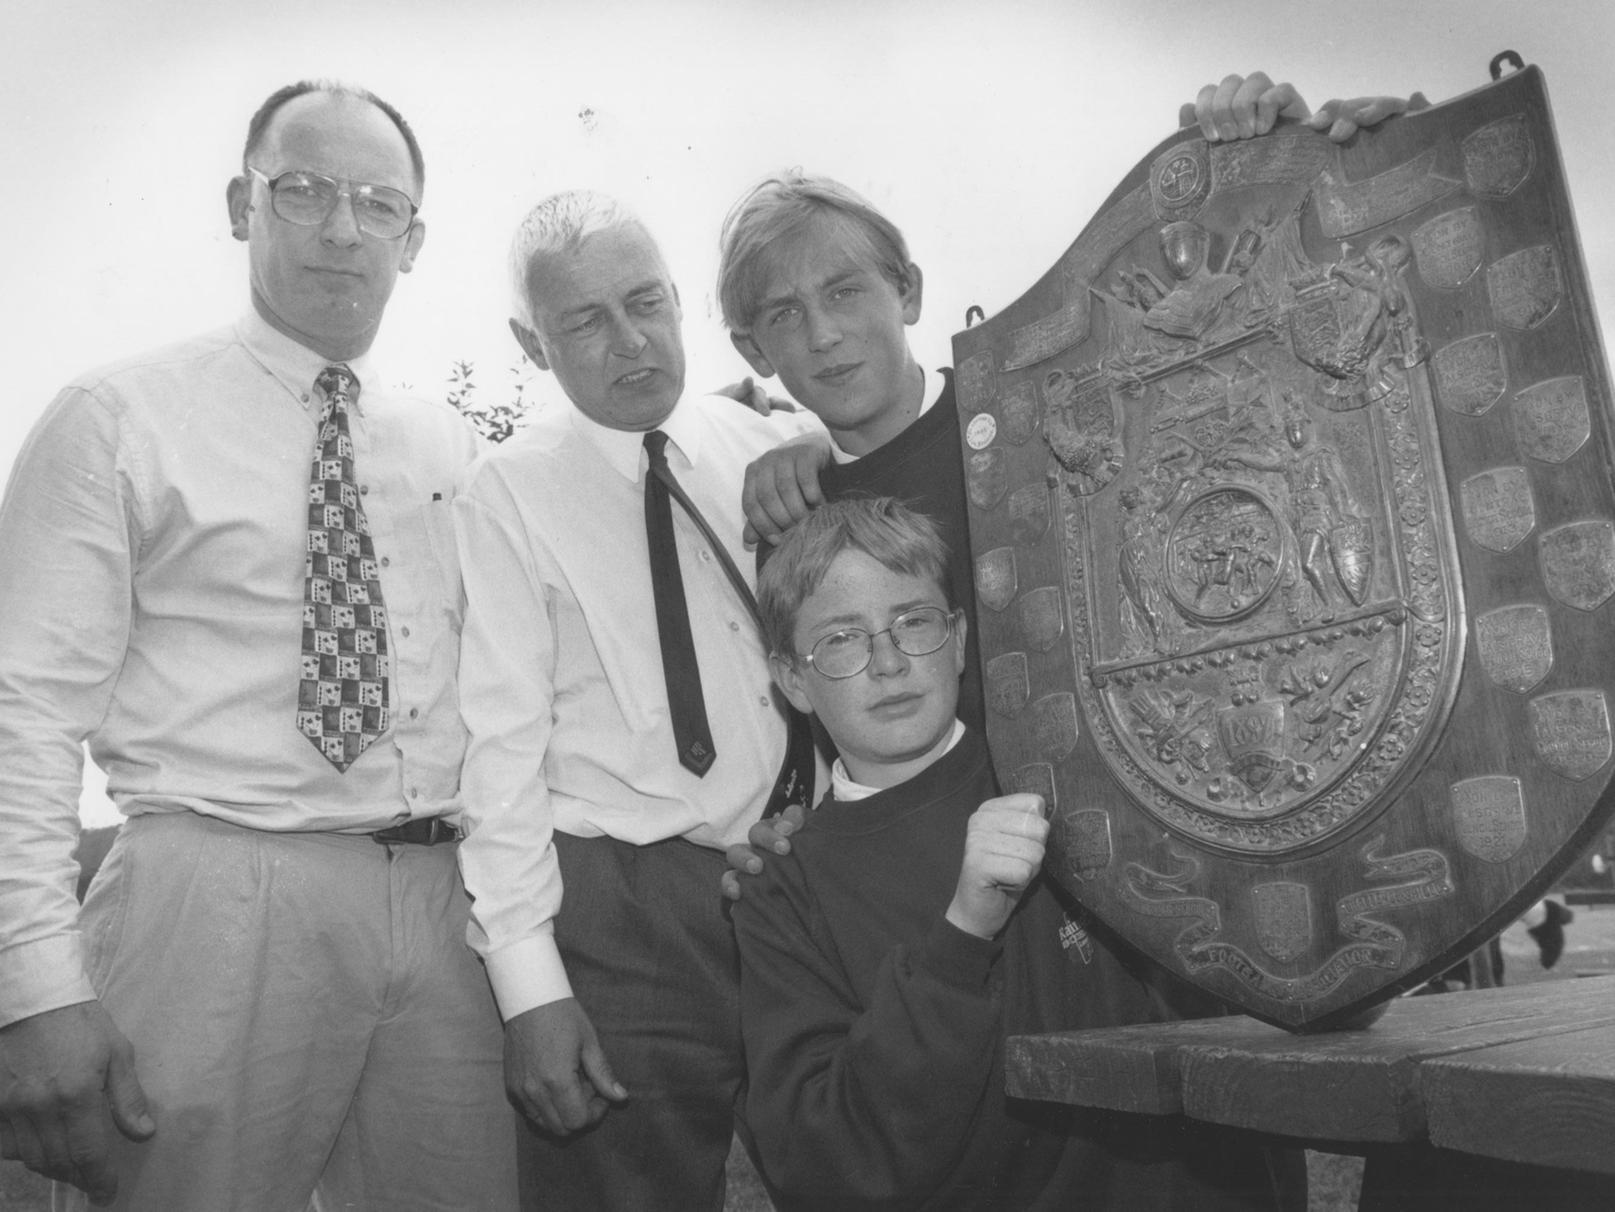 Raincliffe School Year 10 technology pupils Alex Boak, front, and Adam Hill helped restore the long lost Scarborough and District Schools Football Association Challenge Shield, dating back 100 years. They are joined by teachers Bob Chisholm and Steve Powell. Photo taken in July 1997.